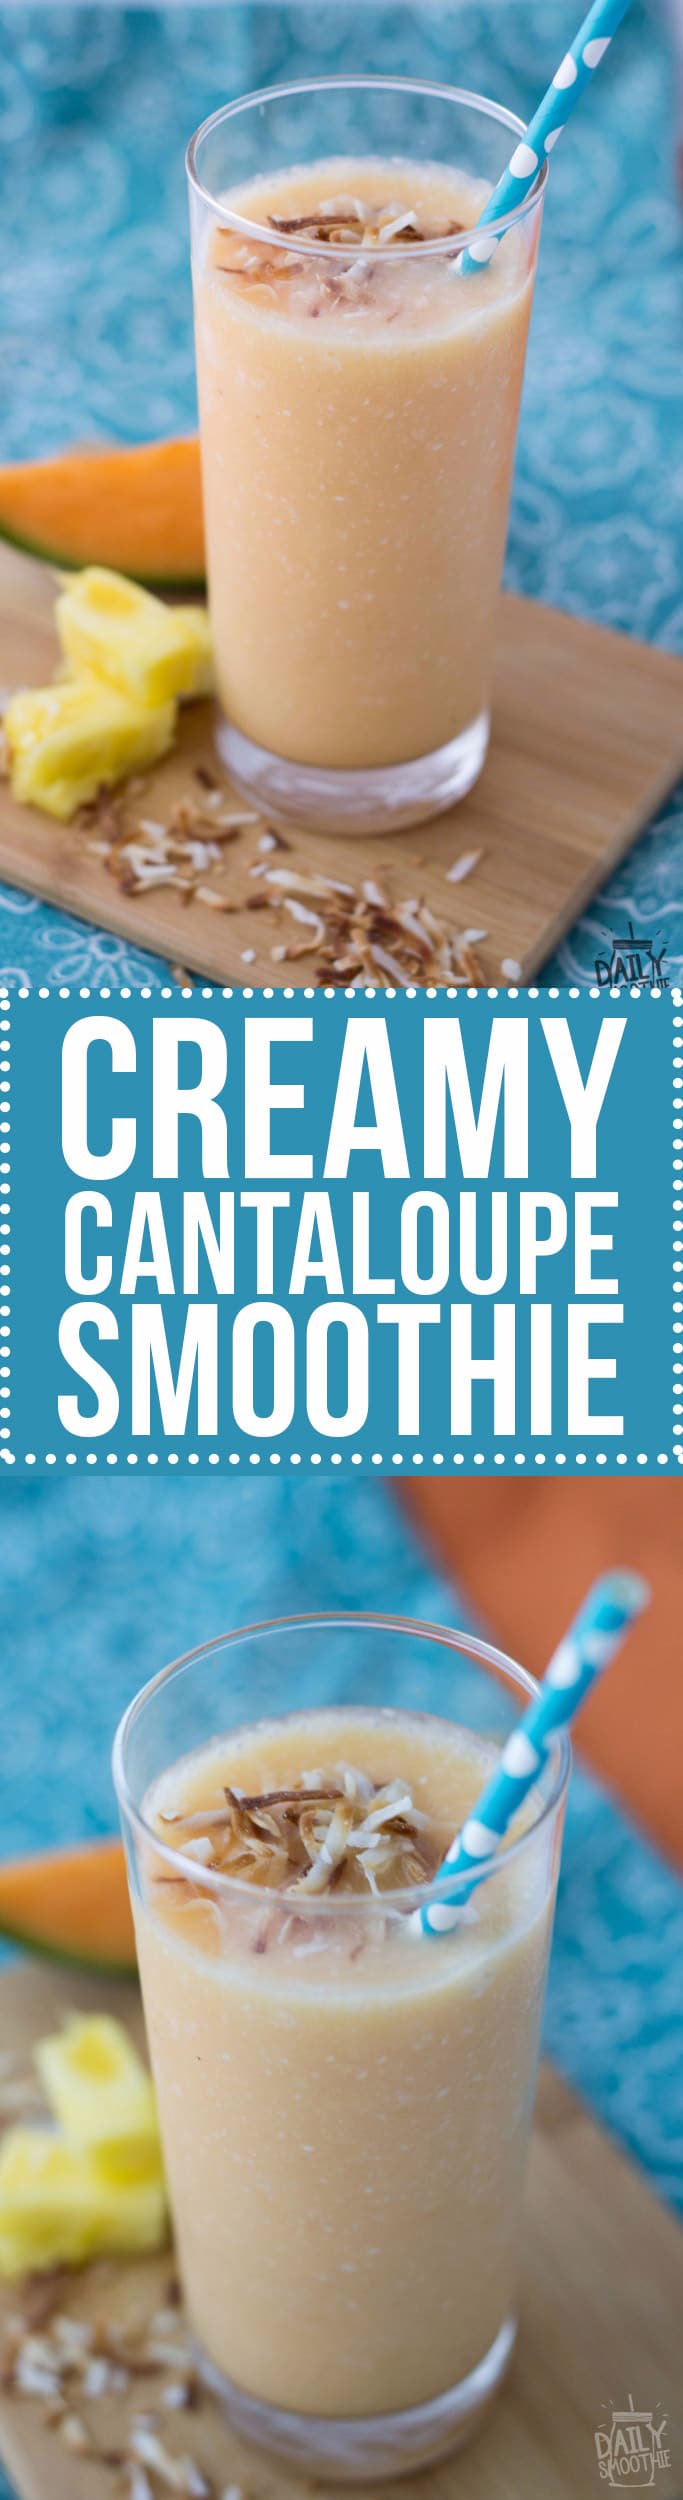 This creamy cantaloupe smoothie is a refreshing summer drink! With lots of cantaloupe blended with coconut milk and pineapple, drinking one feels like you're on a vacation!